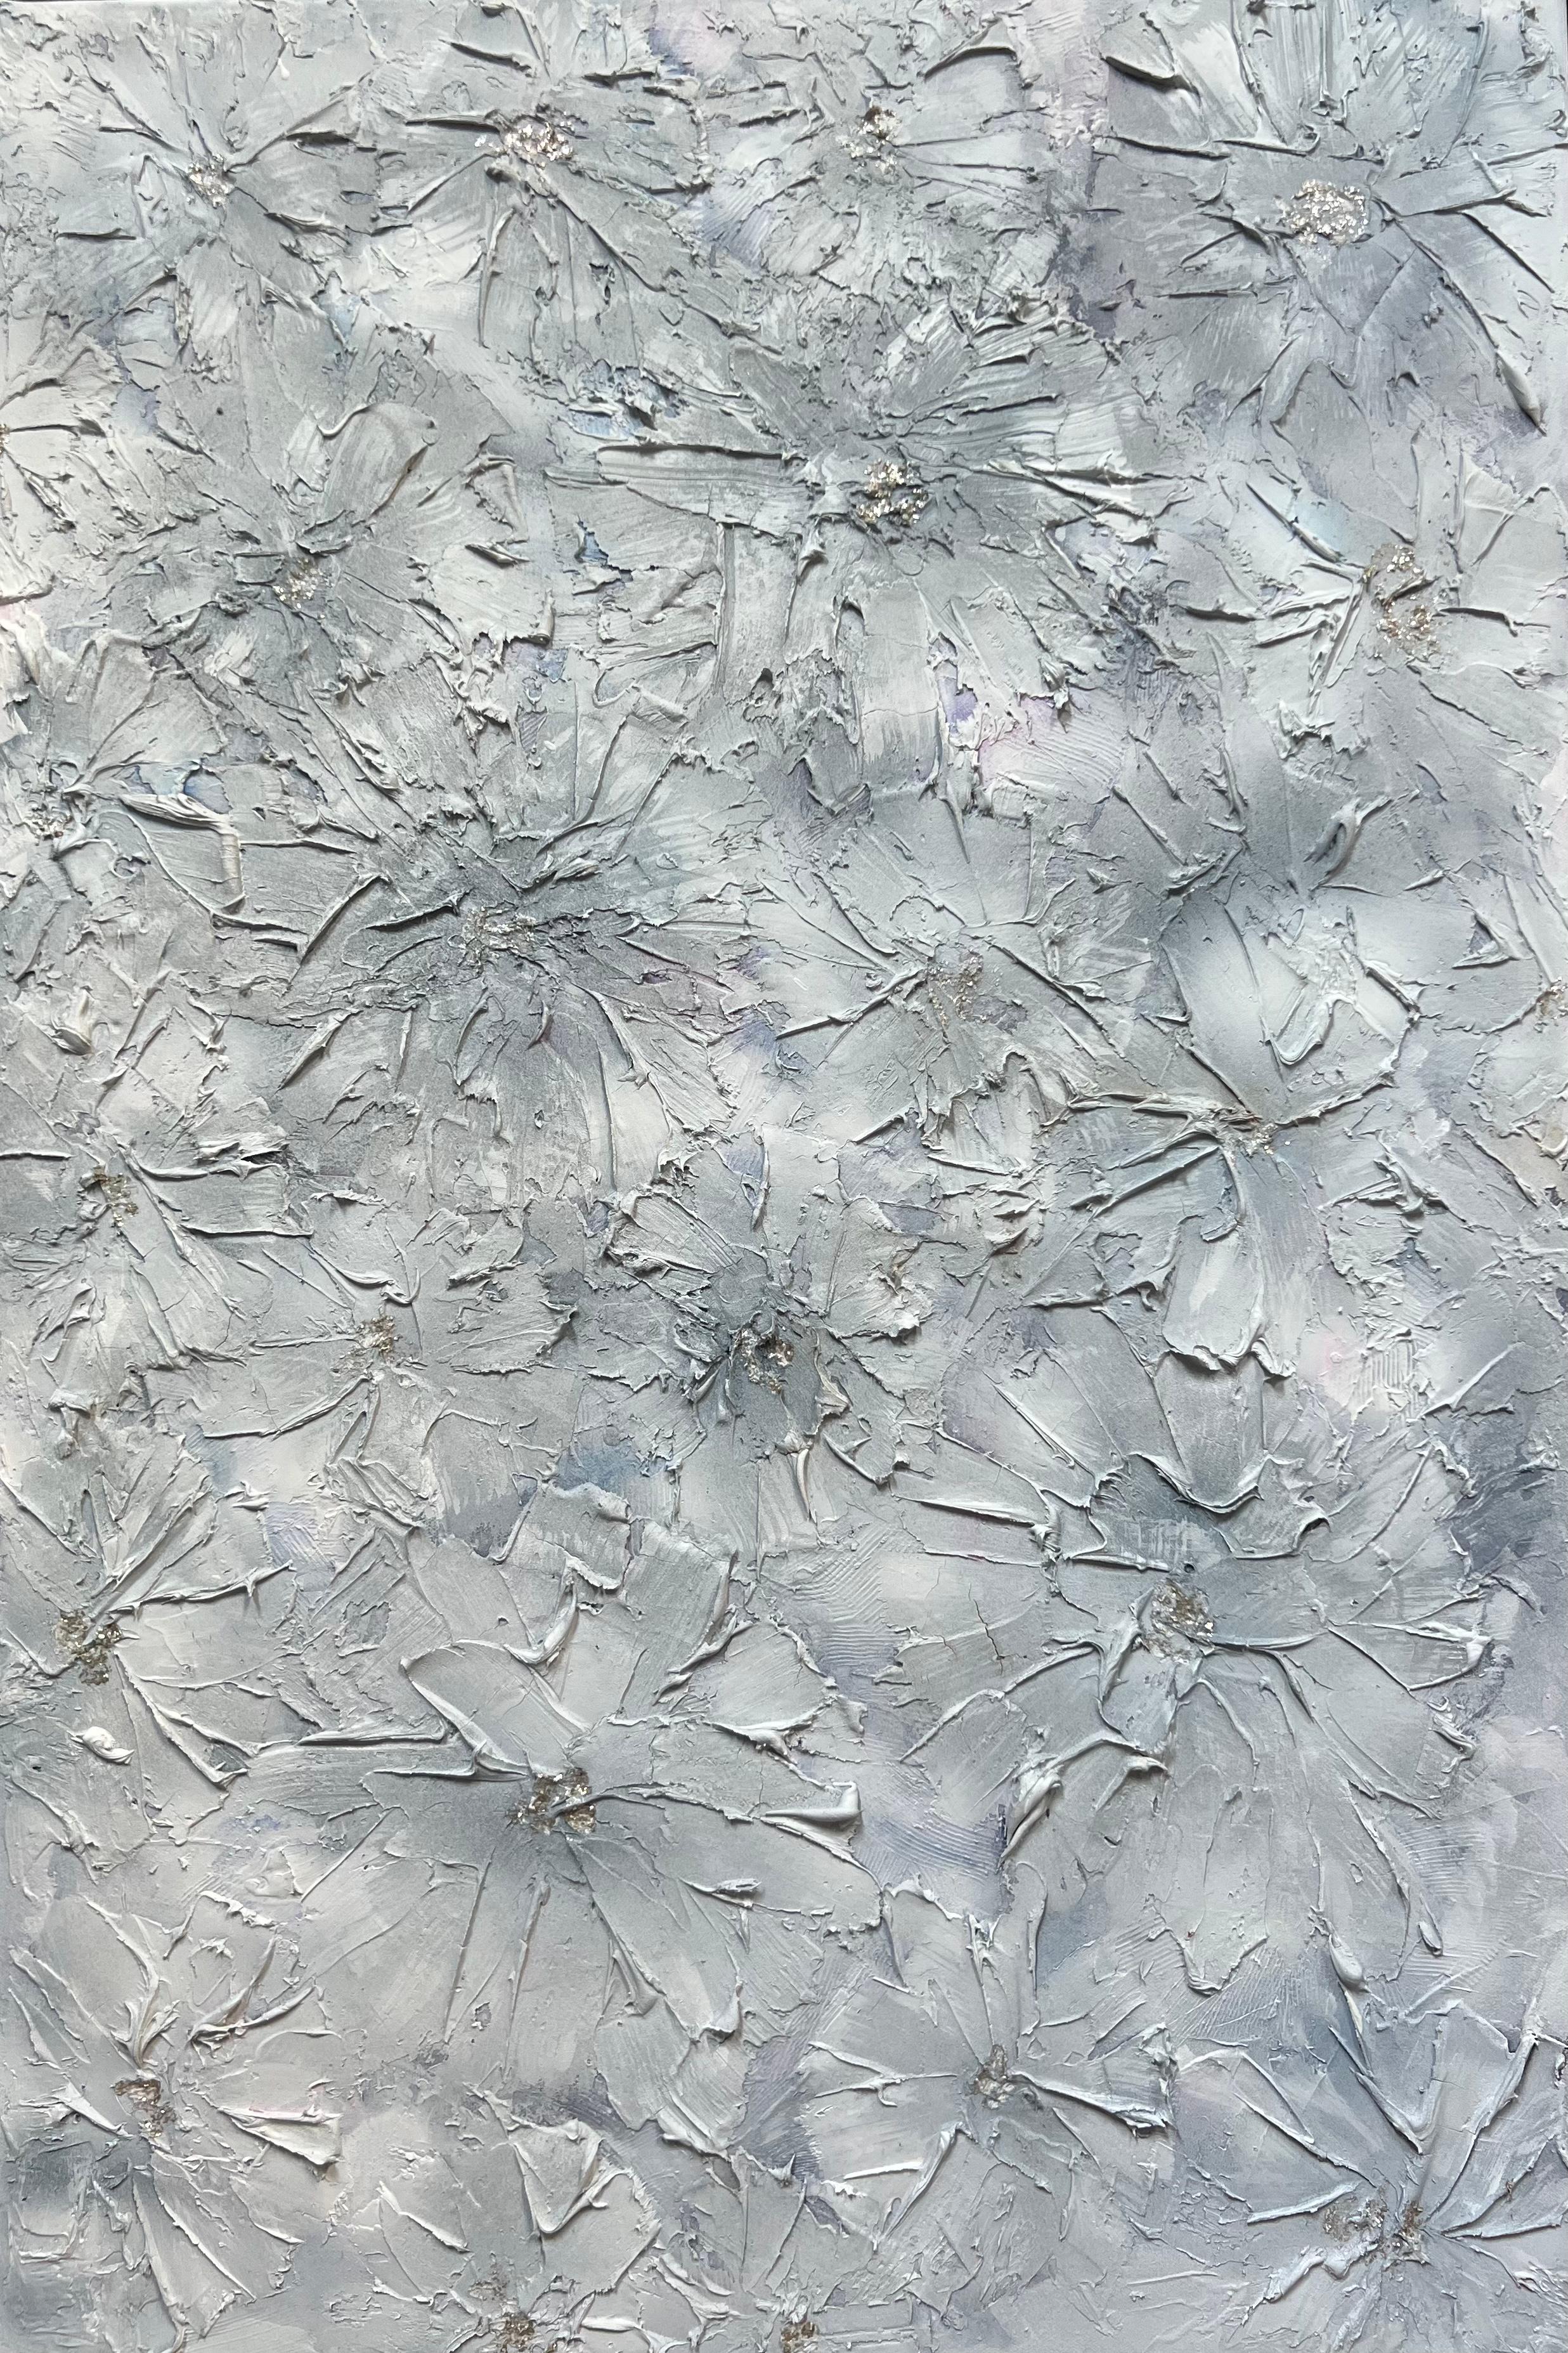 Delicate Flower Baby Blue, Floral Abstract Mixed Media on Canvas, Signed  - Mixed Media Art by Annie Mandelkern